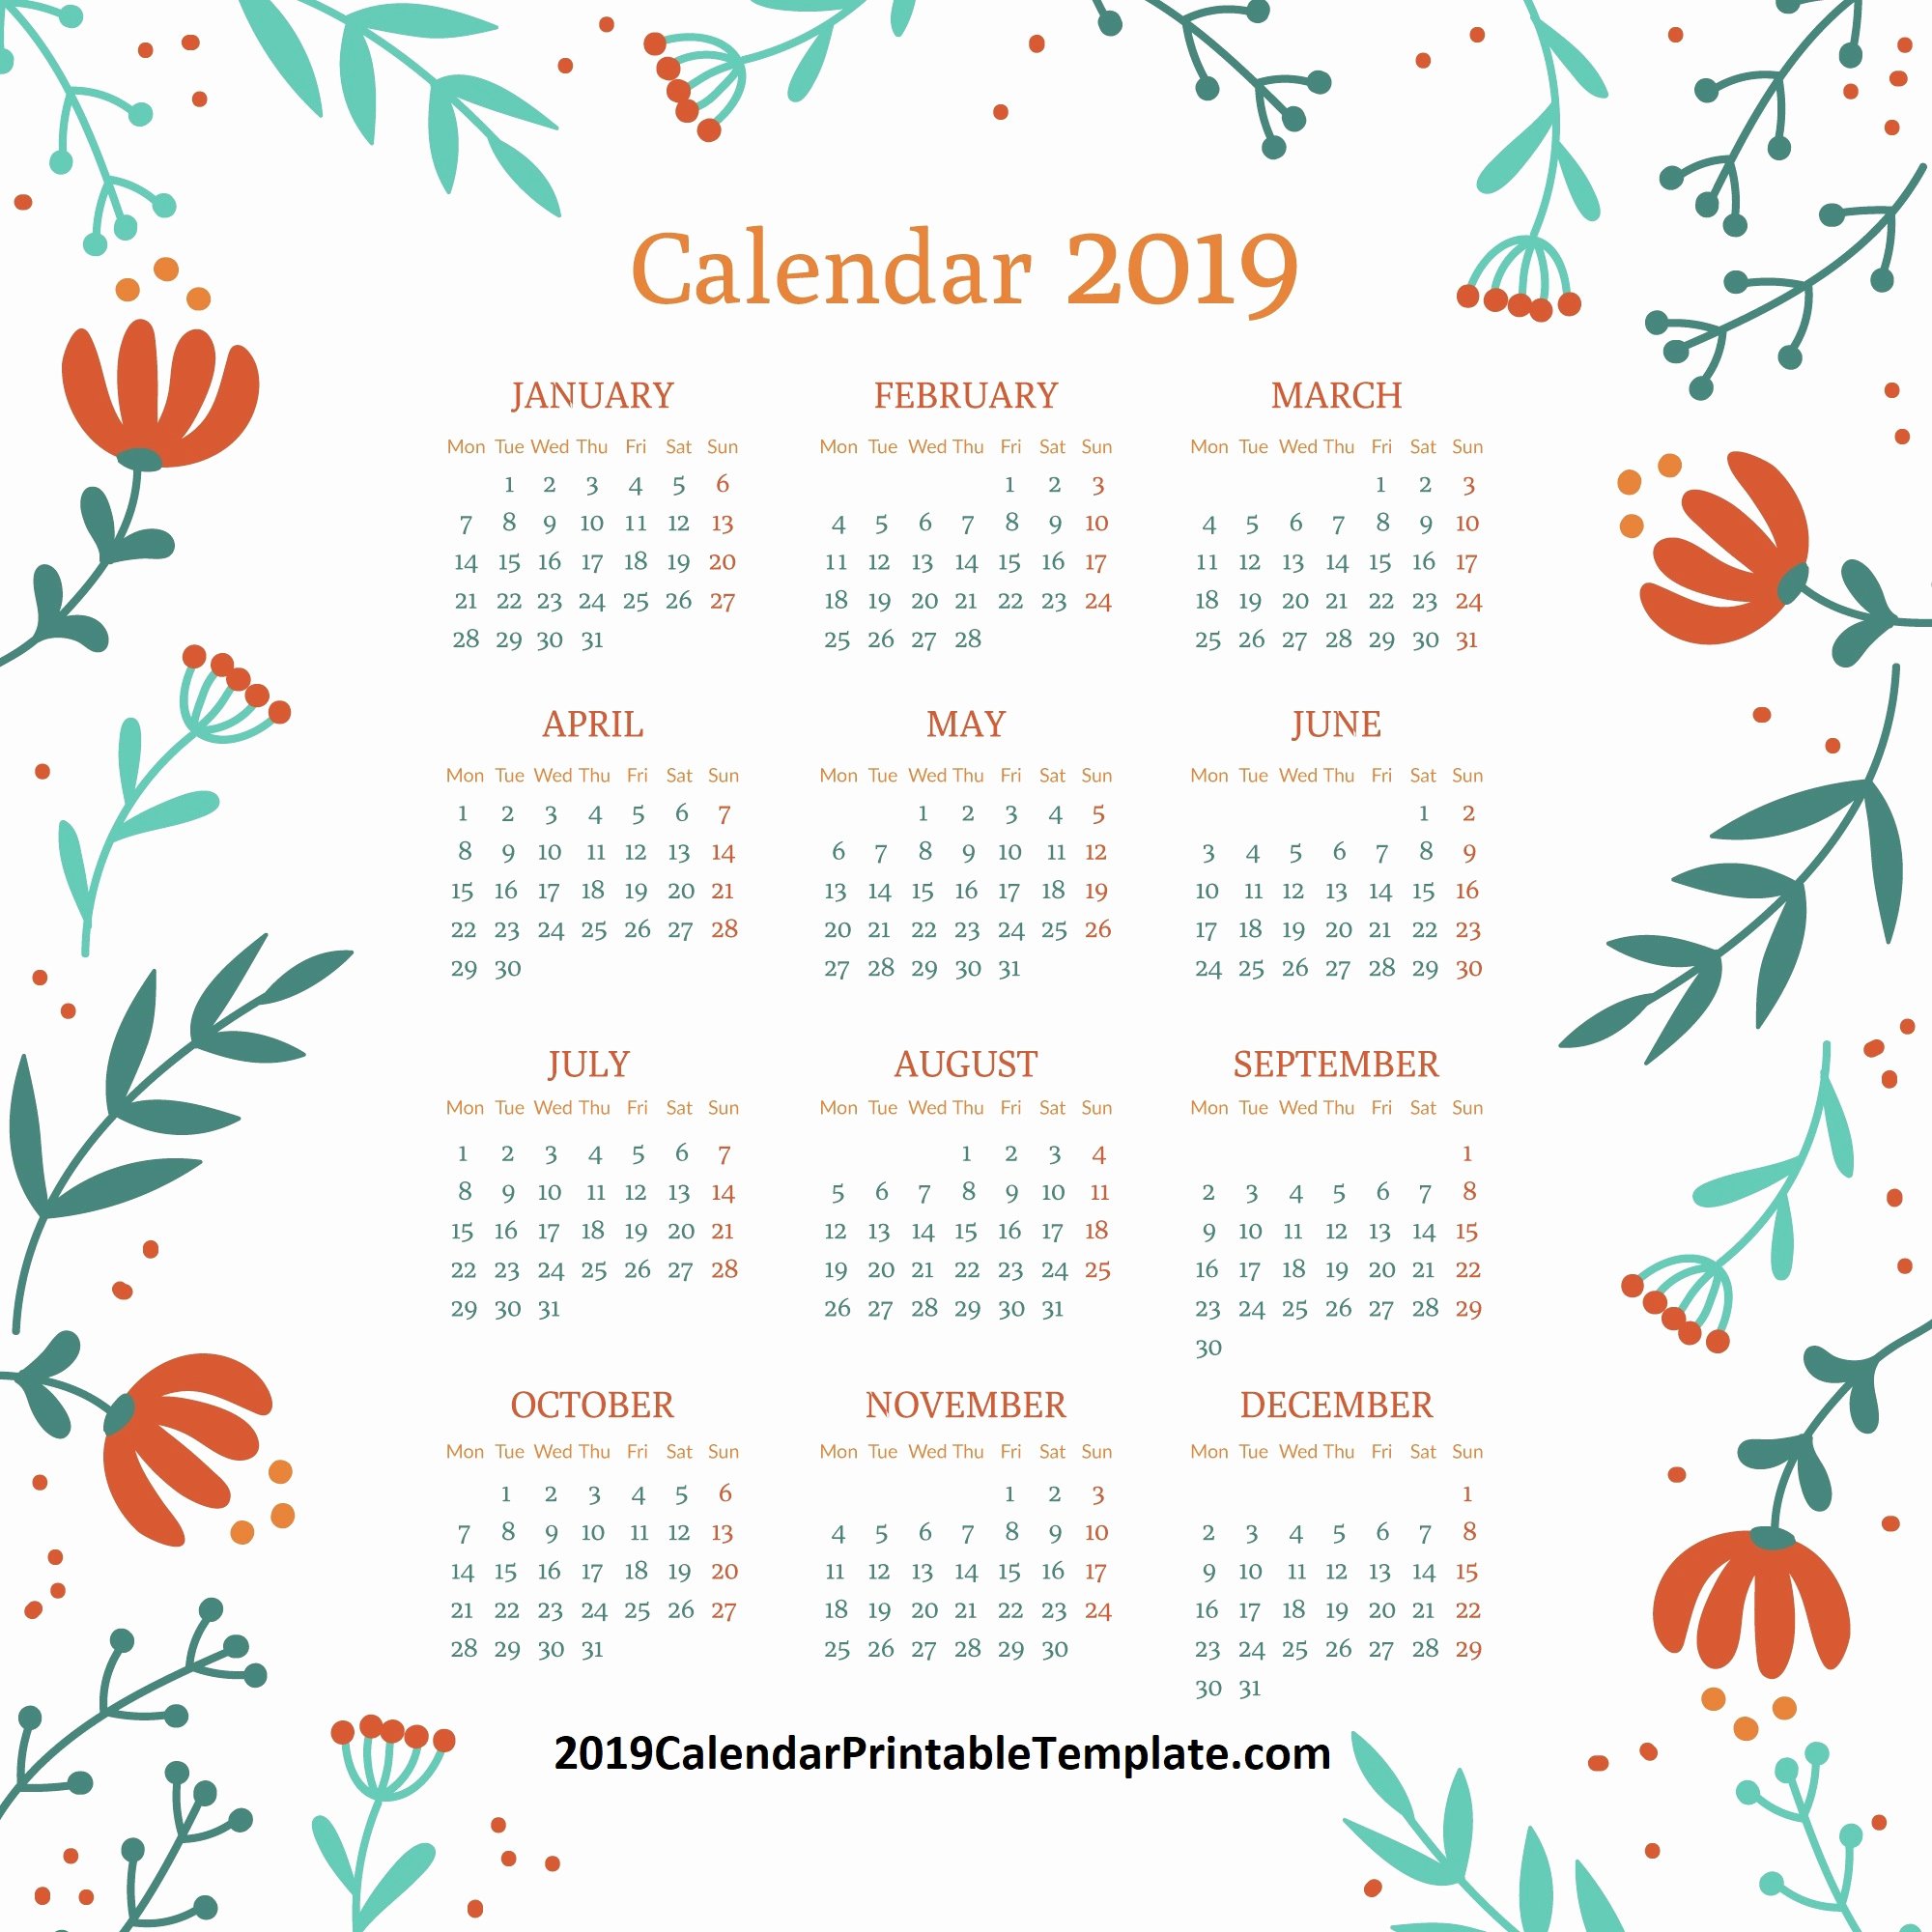 Monthly Calendar Template 2019 Luxury 2019 Monthly Calendar Template 2019 Calendar Printable